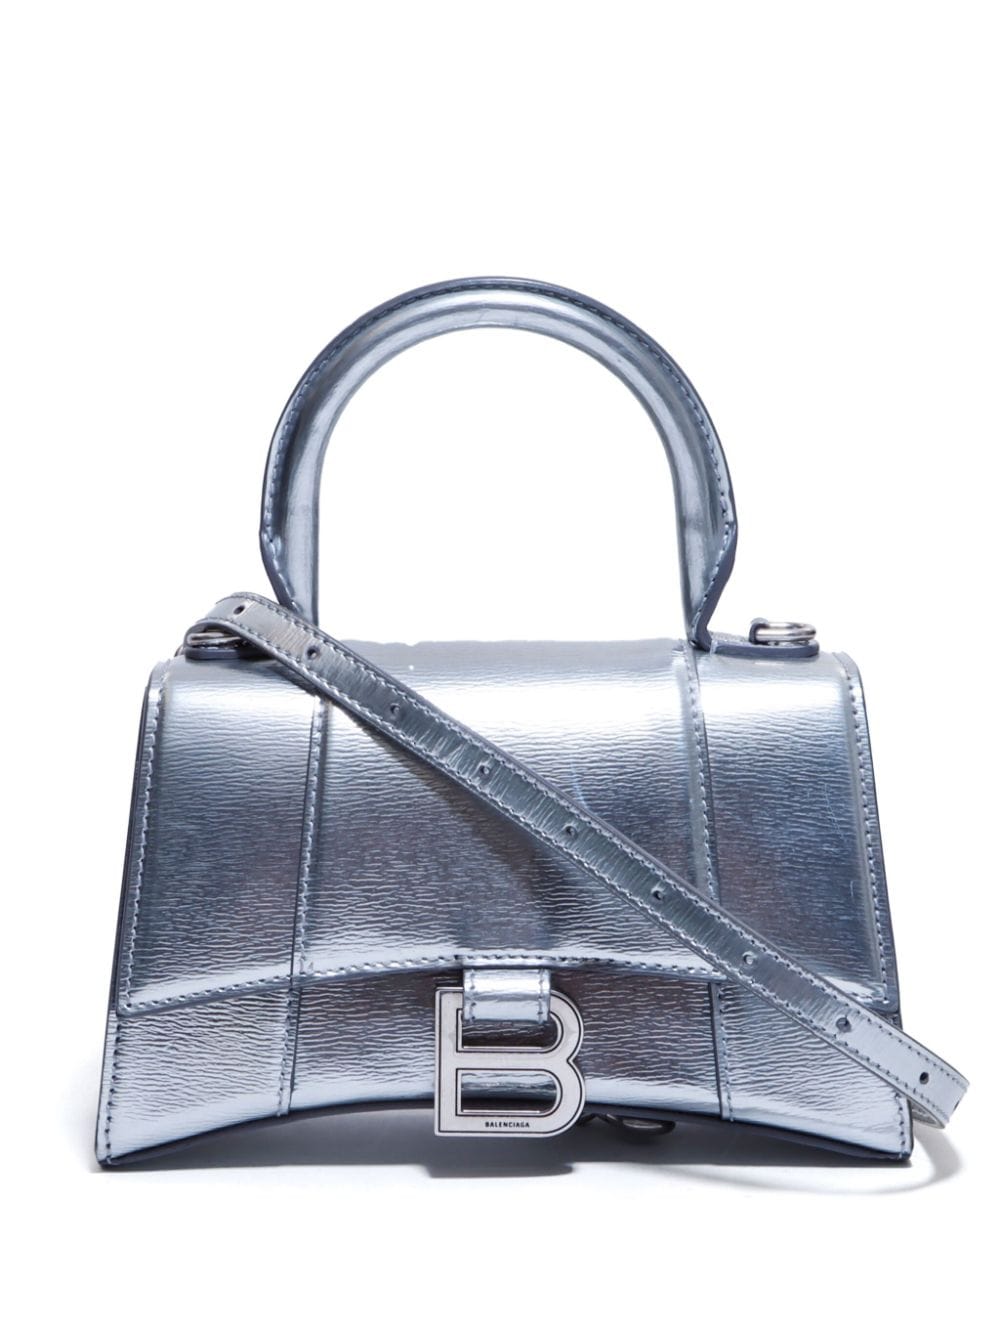 Balenciaga Pre-Owned Hourglass XS two-way leather bag - Silver von Balenciaga Pre-Owned